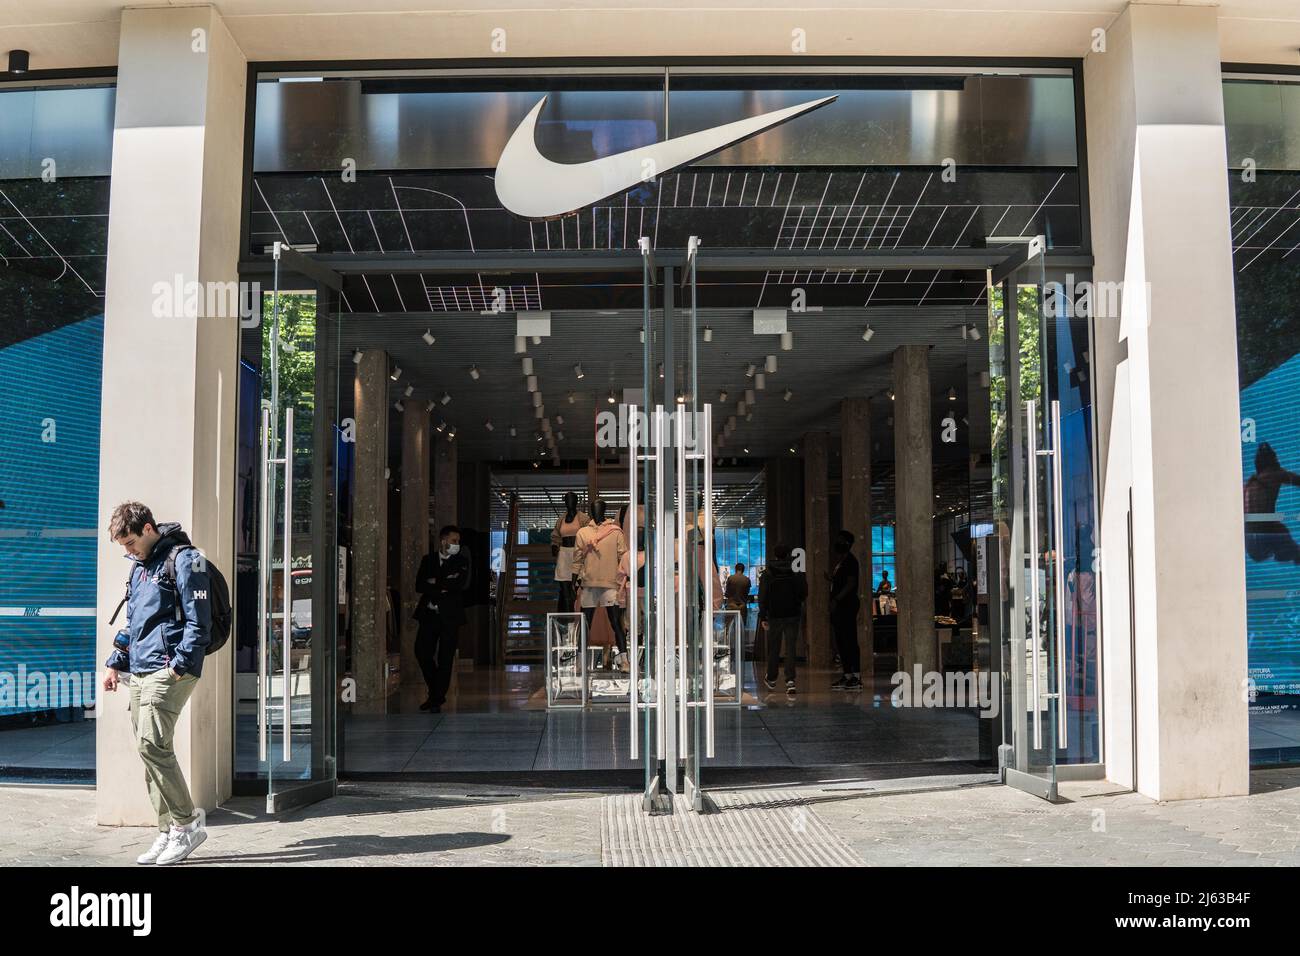 Barcelona, Spain. 26th Apr, 2022. A walks past the American multinational sport clothing brand Nike